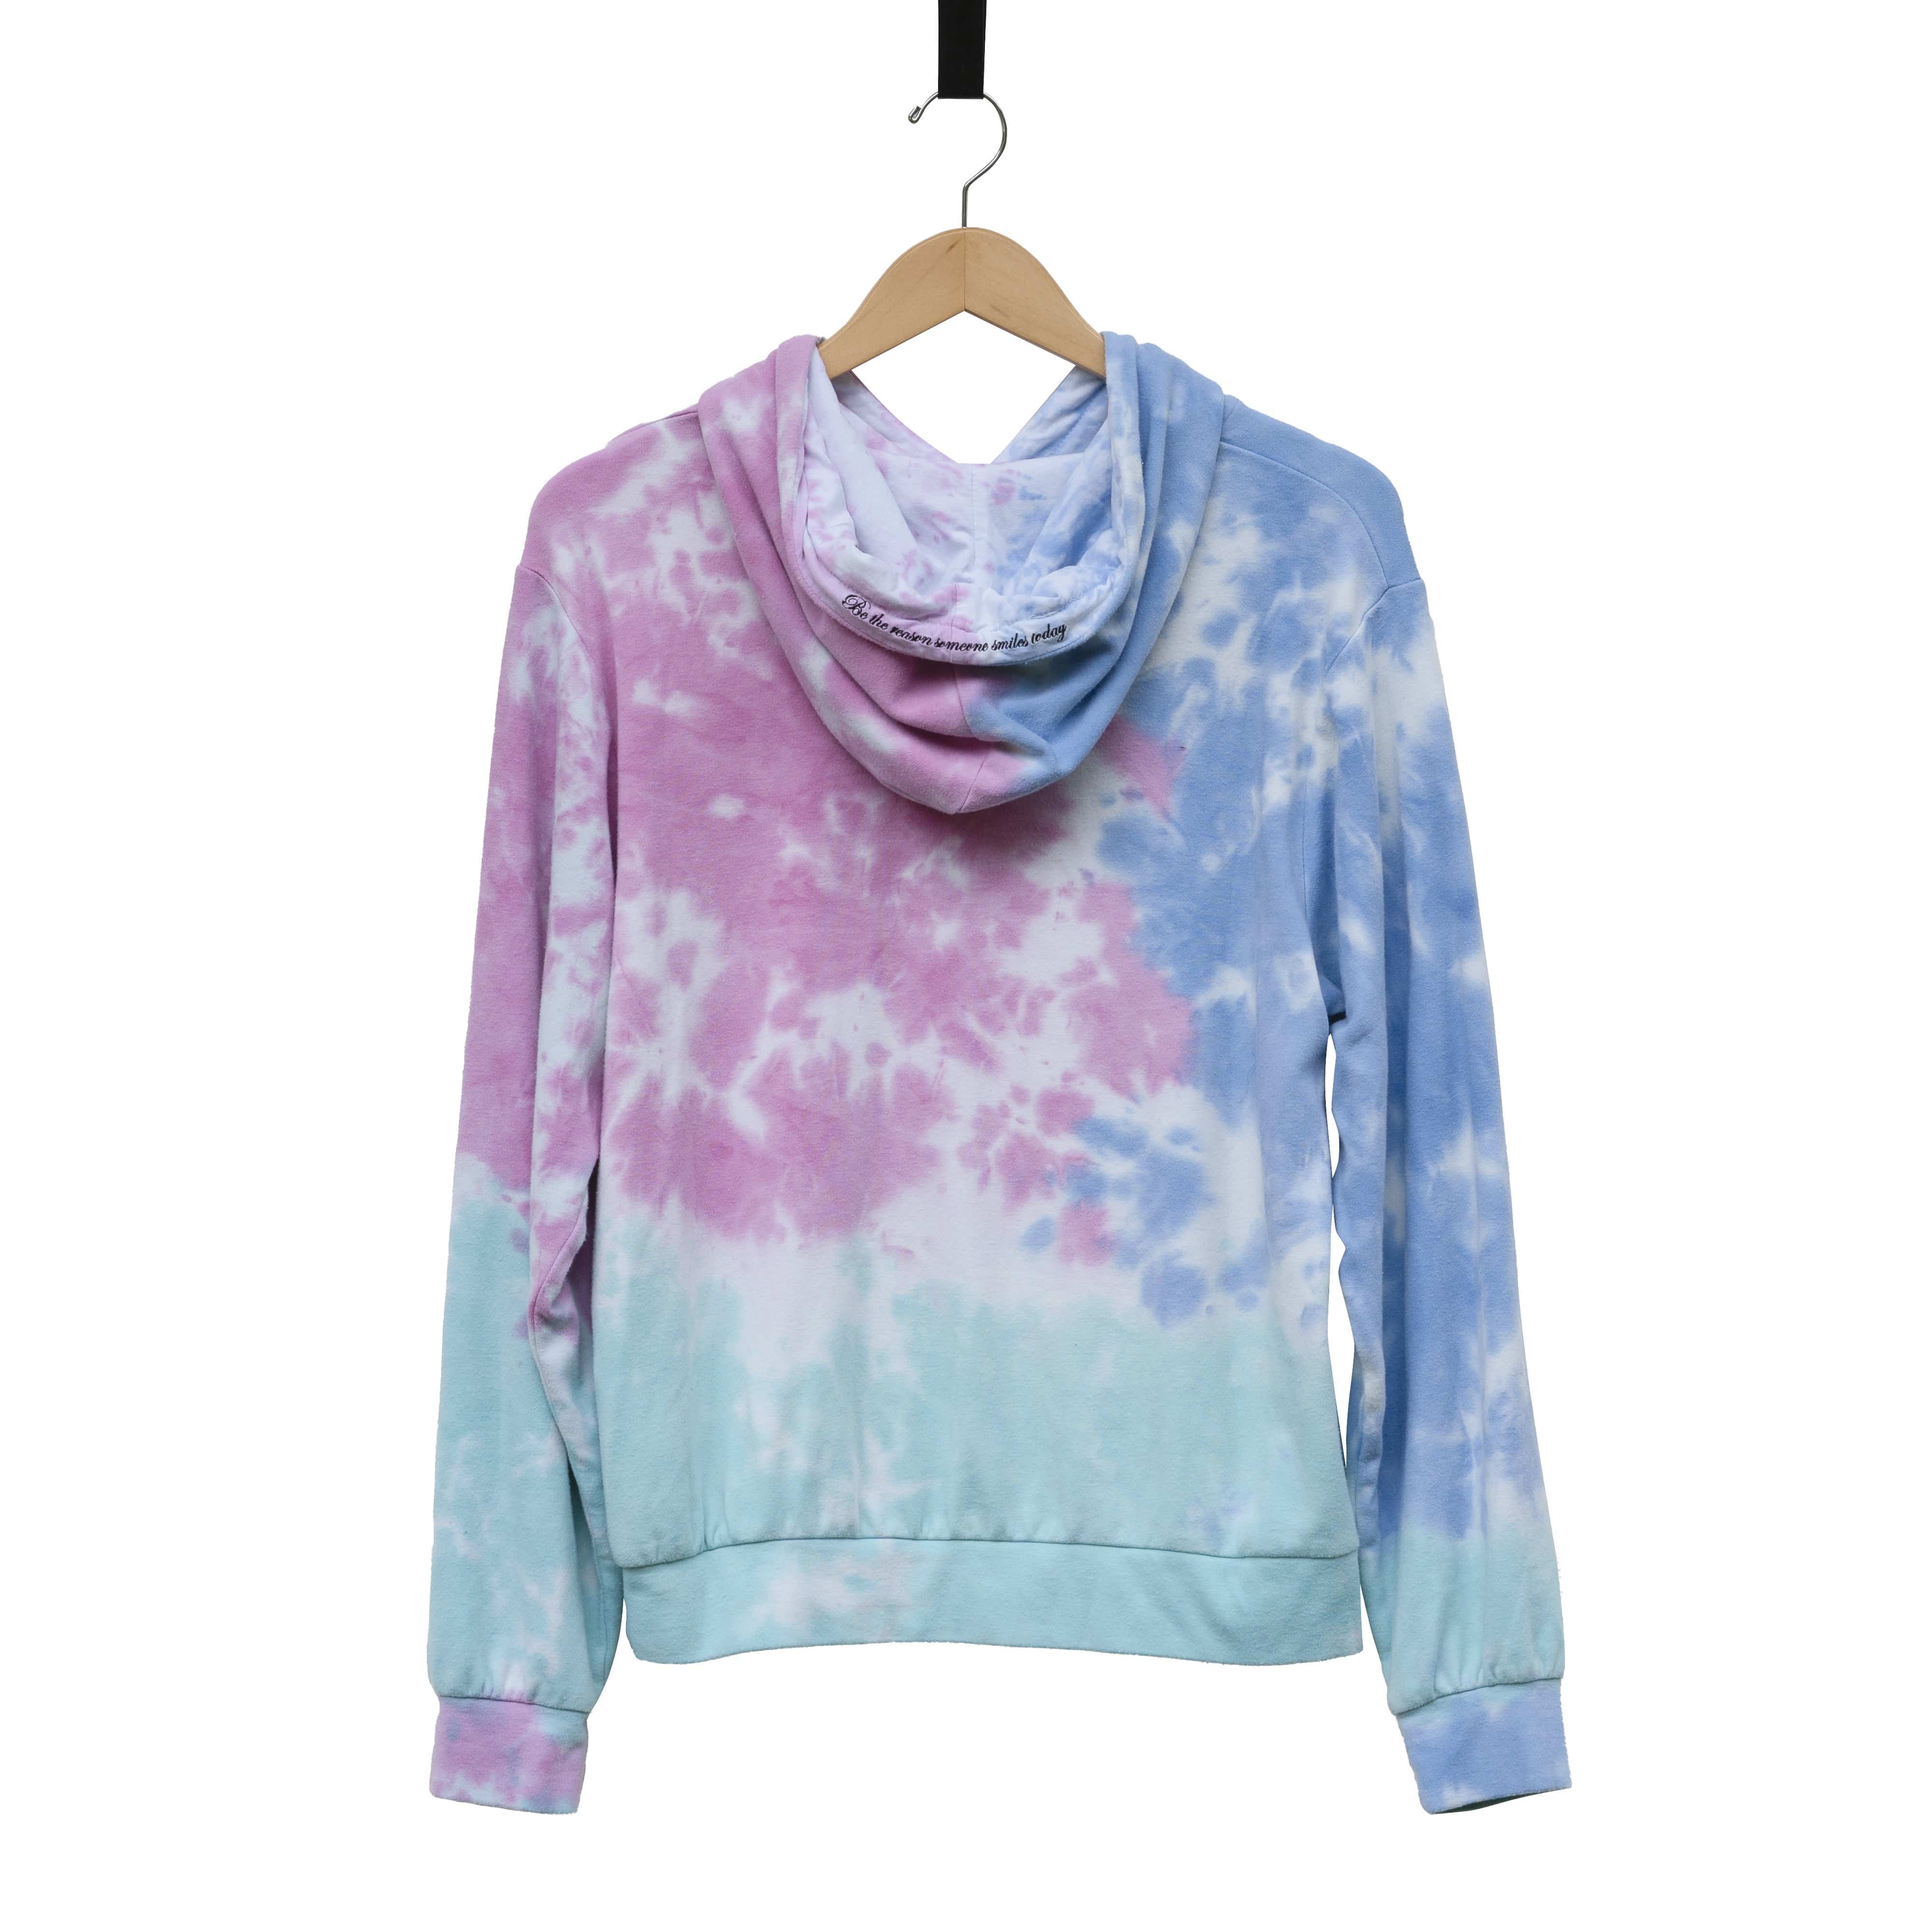 Cotton Candy Cloud Blend Hoodie From SLYK - Back Angle